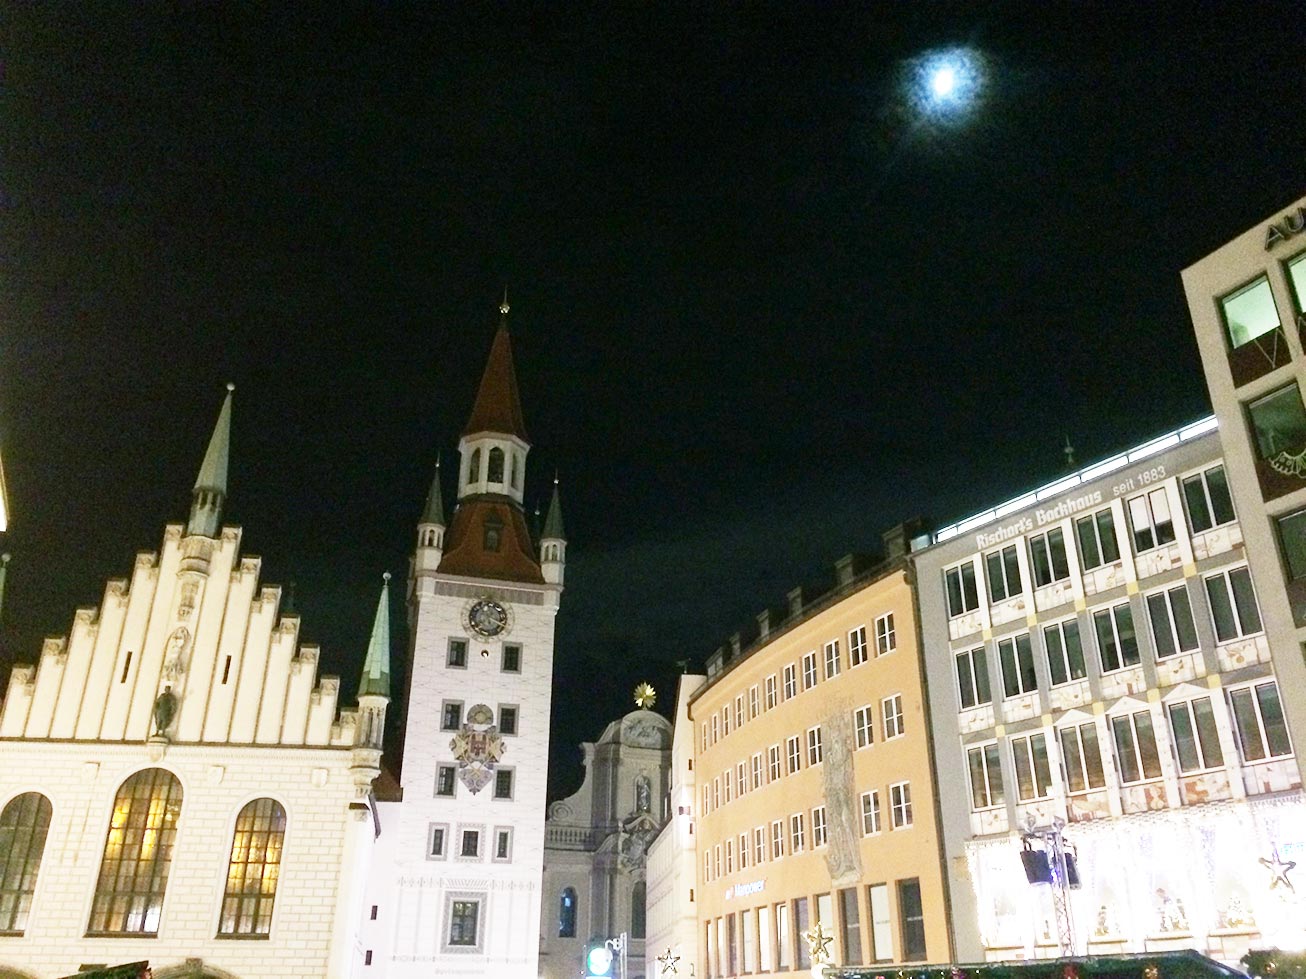 Town Square in Munich, Germany at night with a full moon.